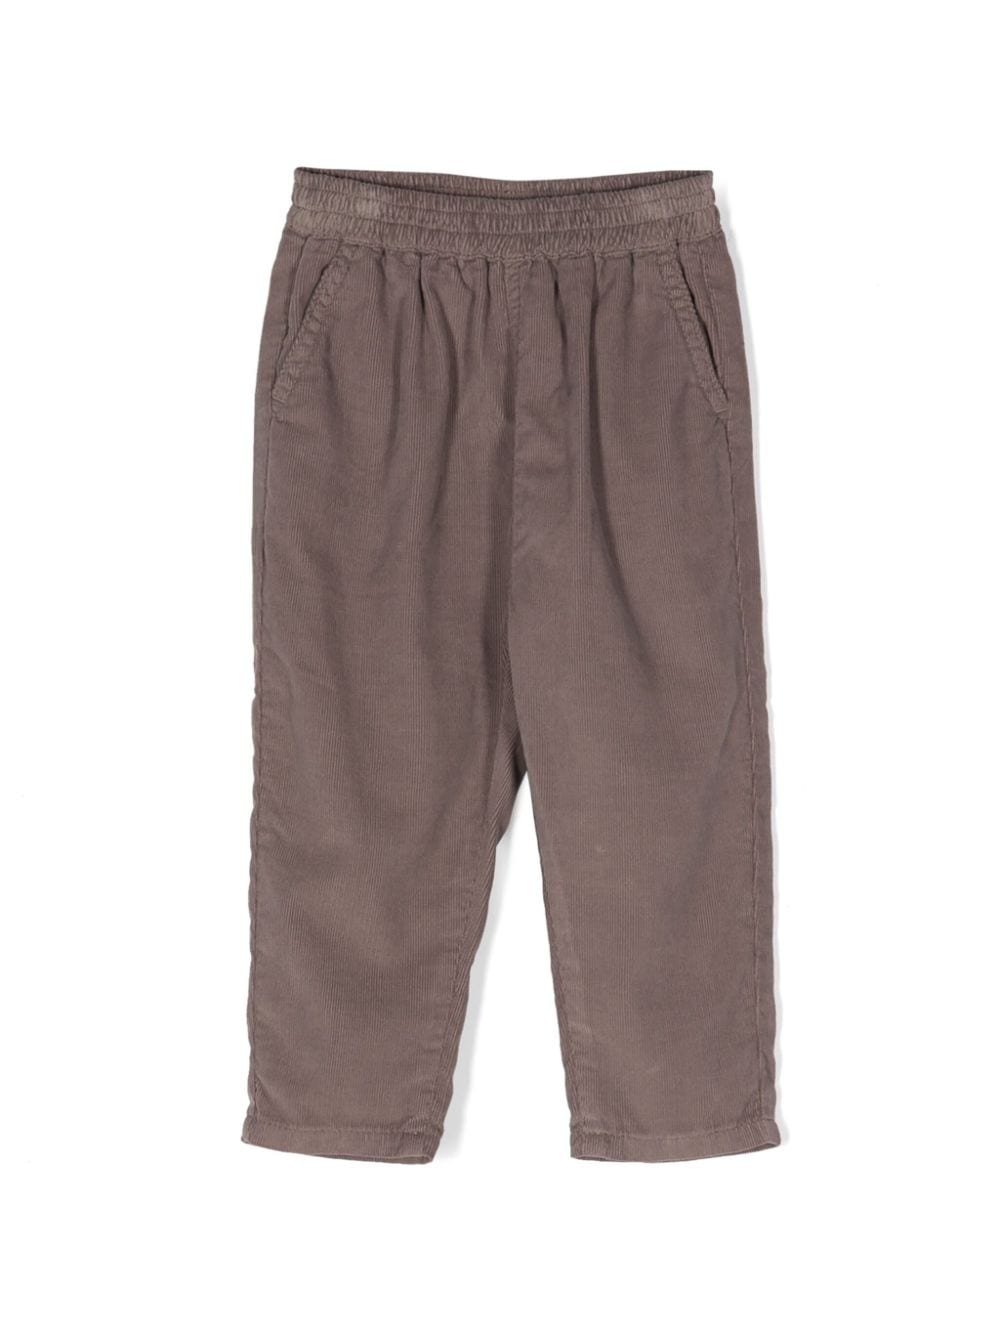 Knot Cairo corduroy trousers - Grey von Knot